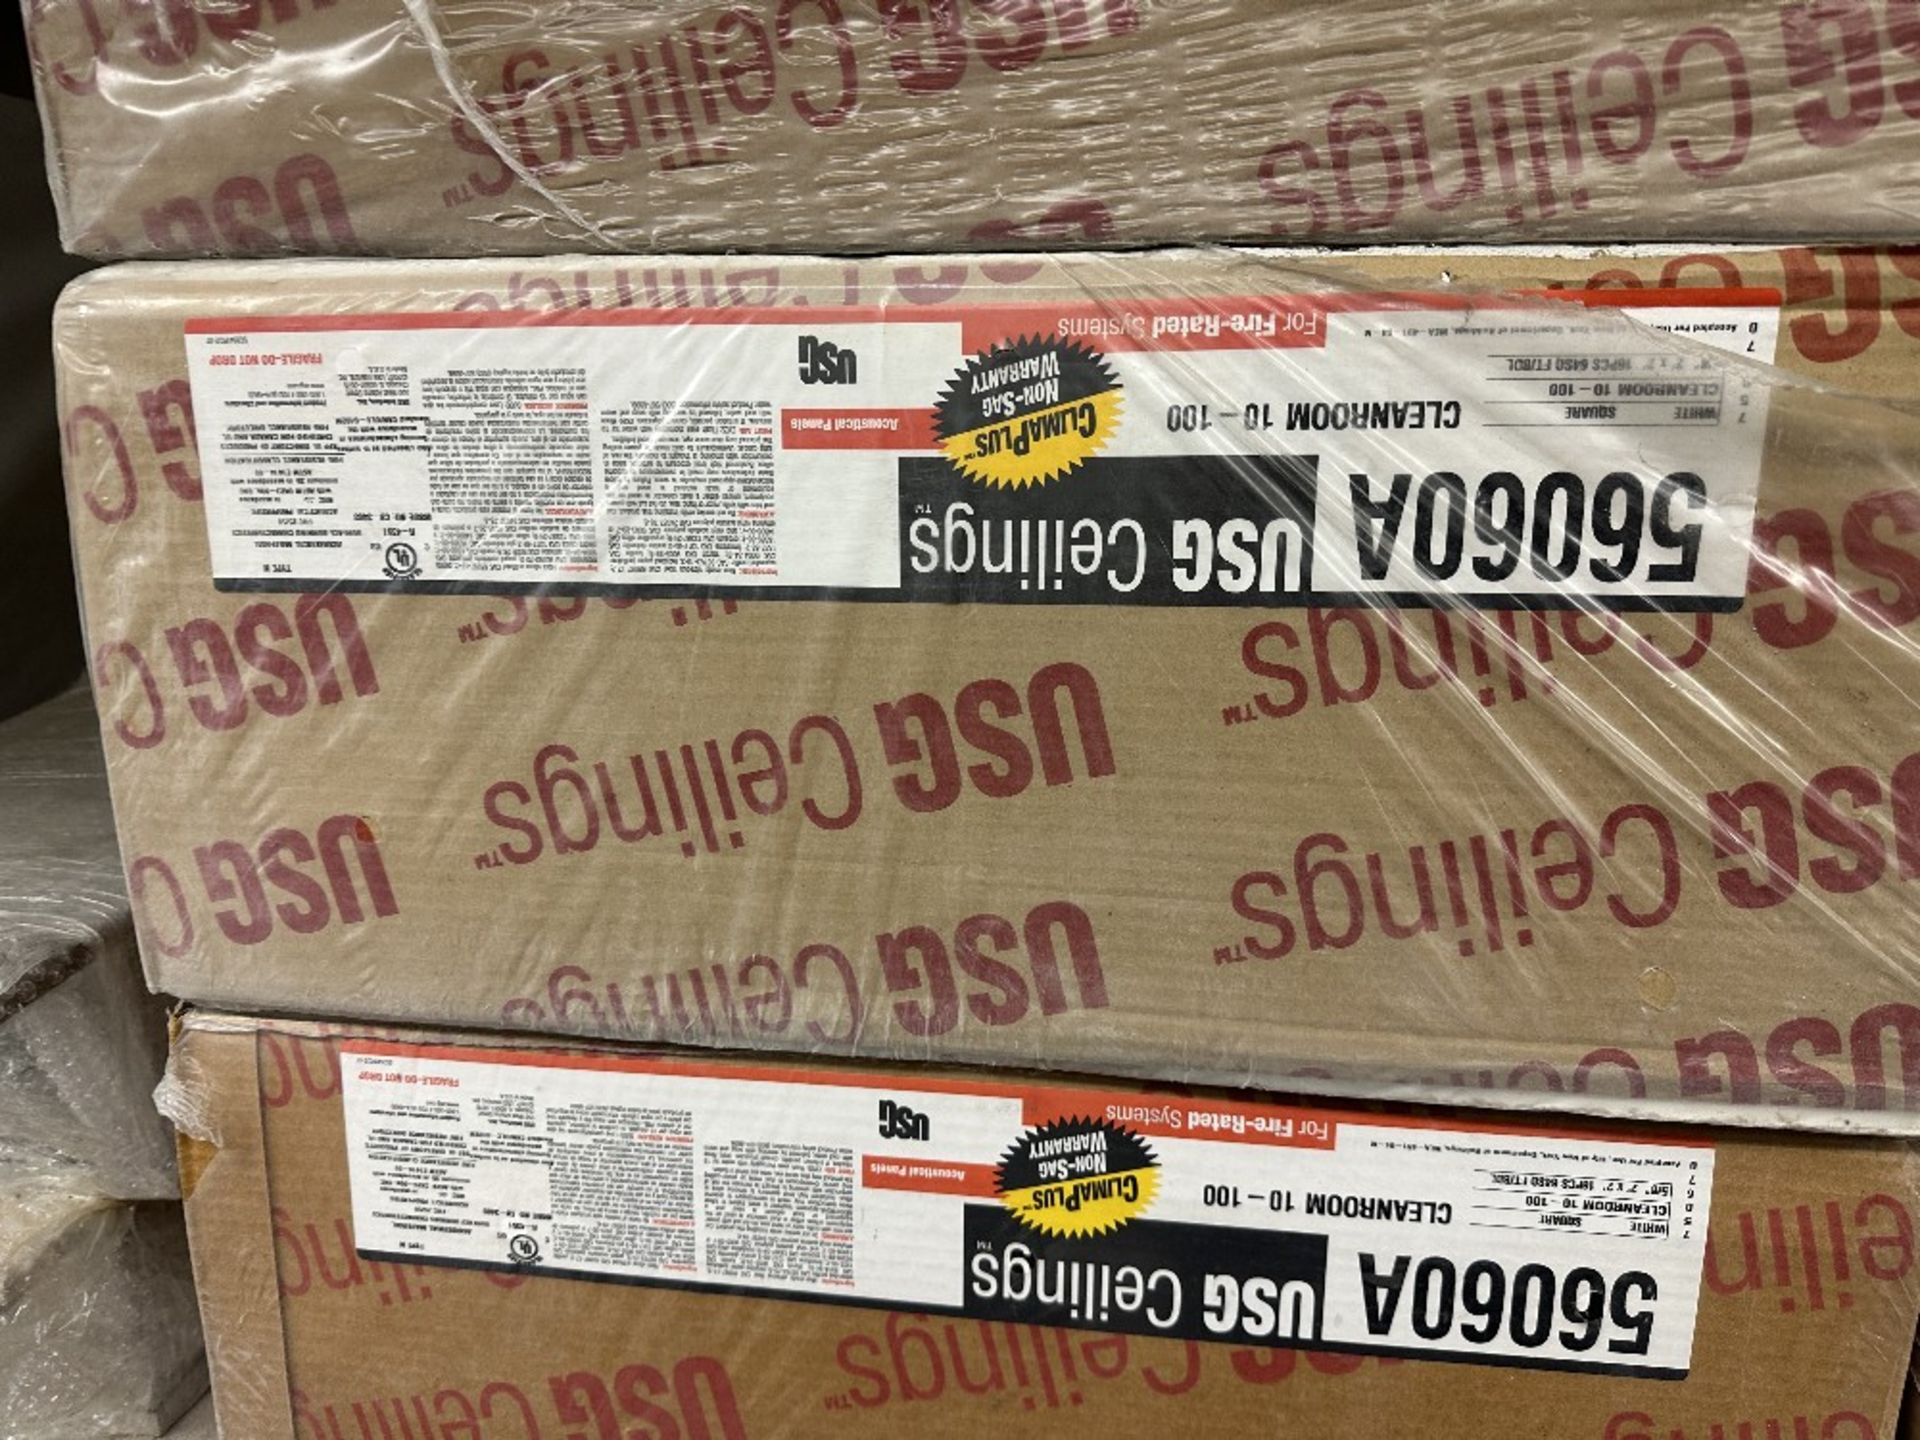 Cases: USG Ceilings 56060A CleanRoom 2x2 Tiles (LOCATED IN MIDDLETOWN, N.Y.)-FOR PACKAGING &